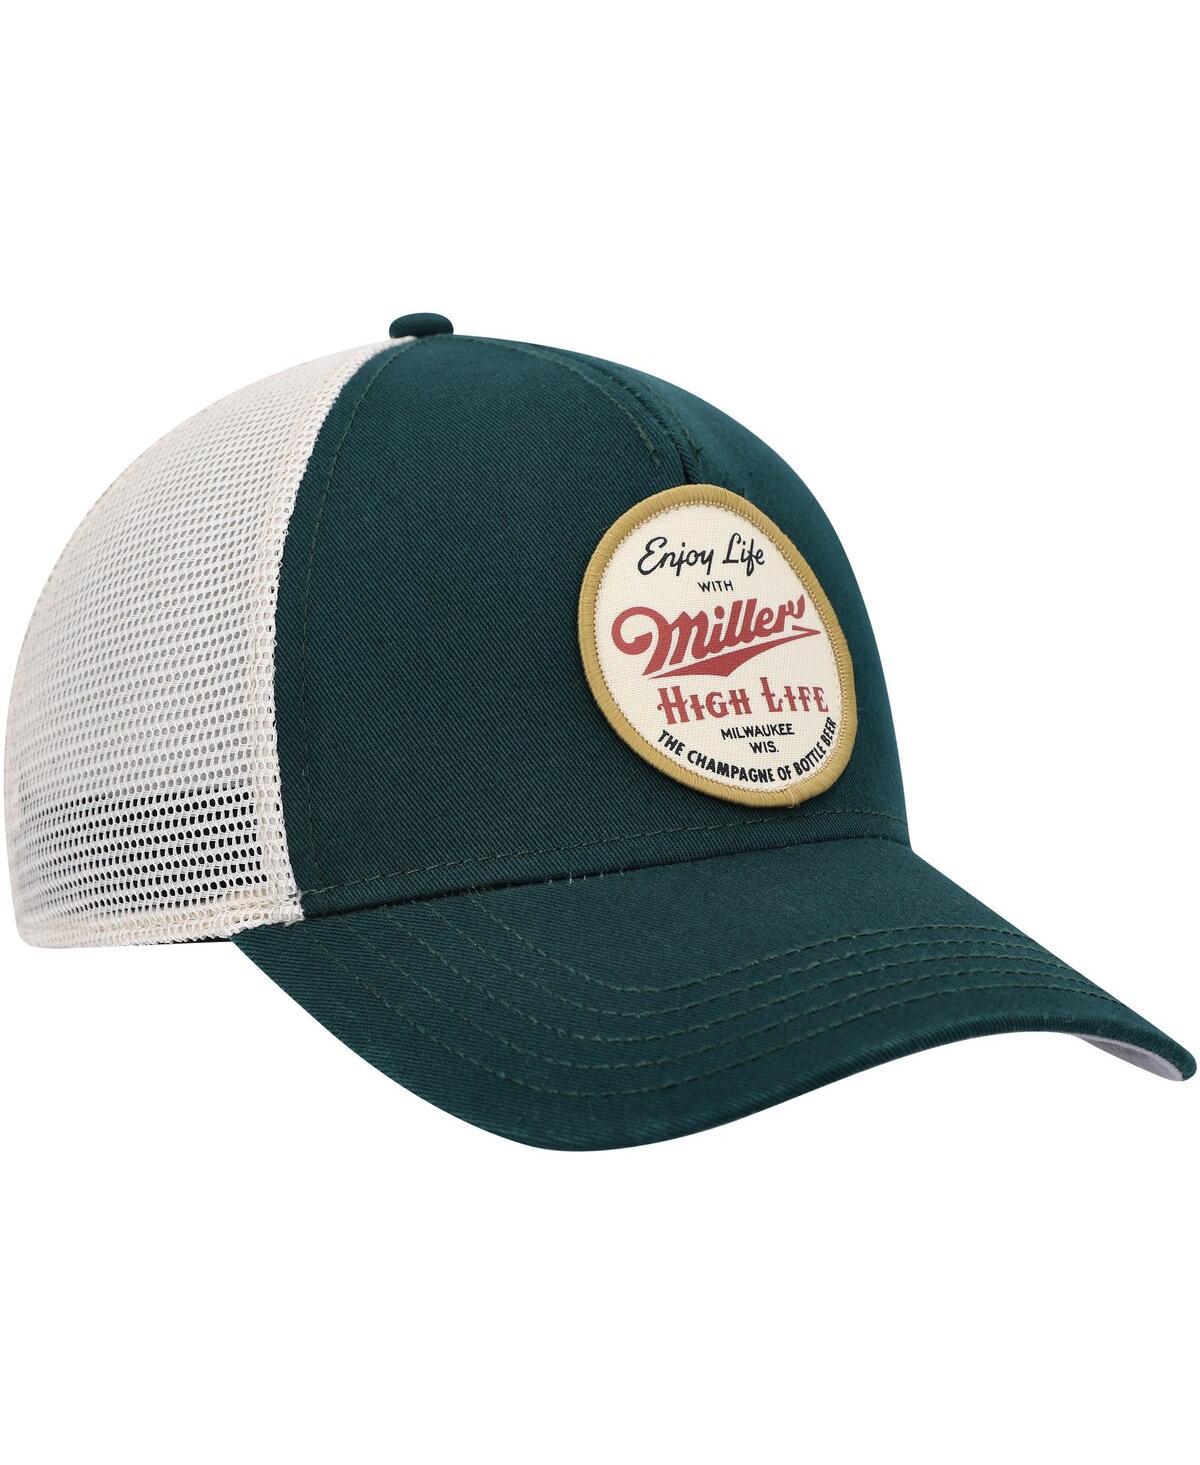 American Needle Miller High Life Canvas Cappy Snapback Hat - Olive - One Size